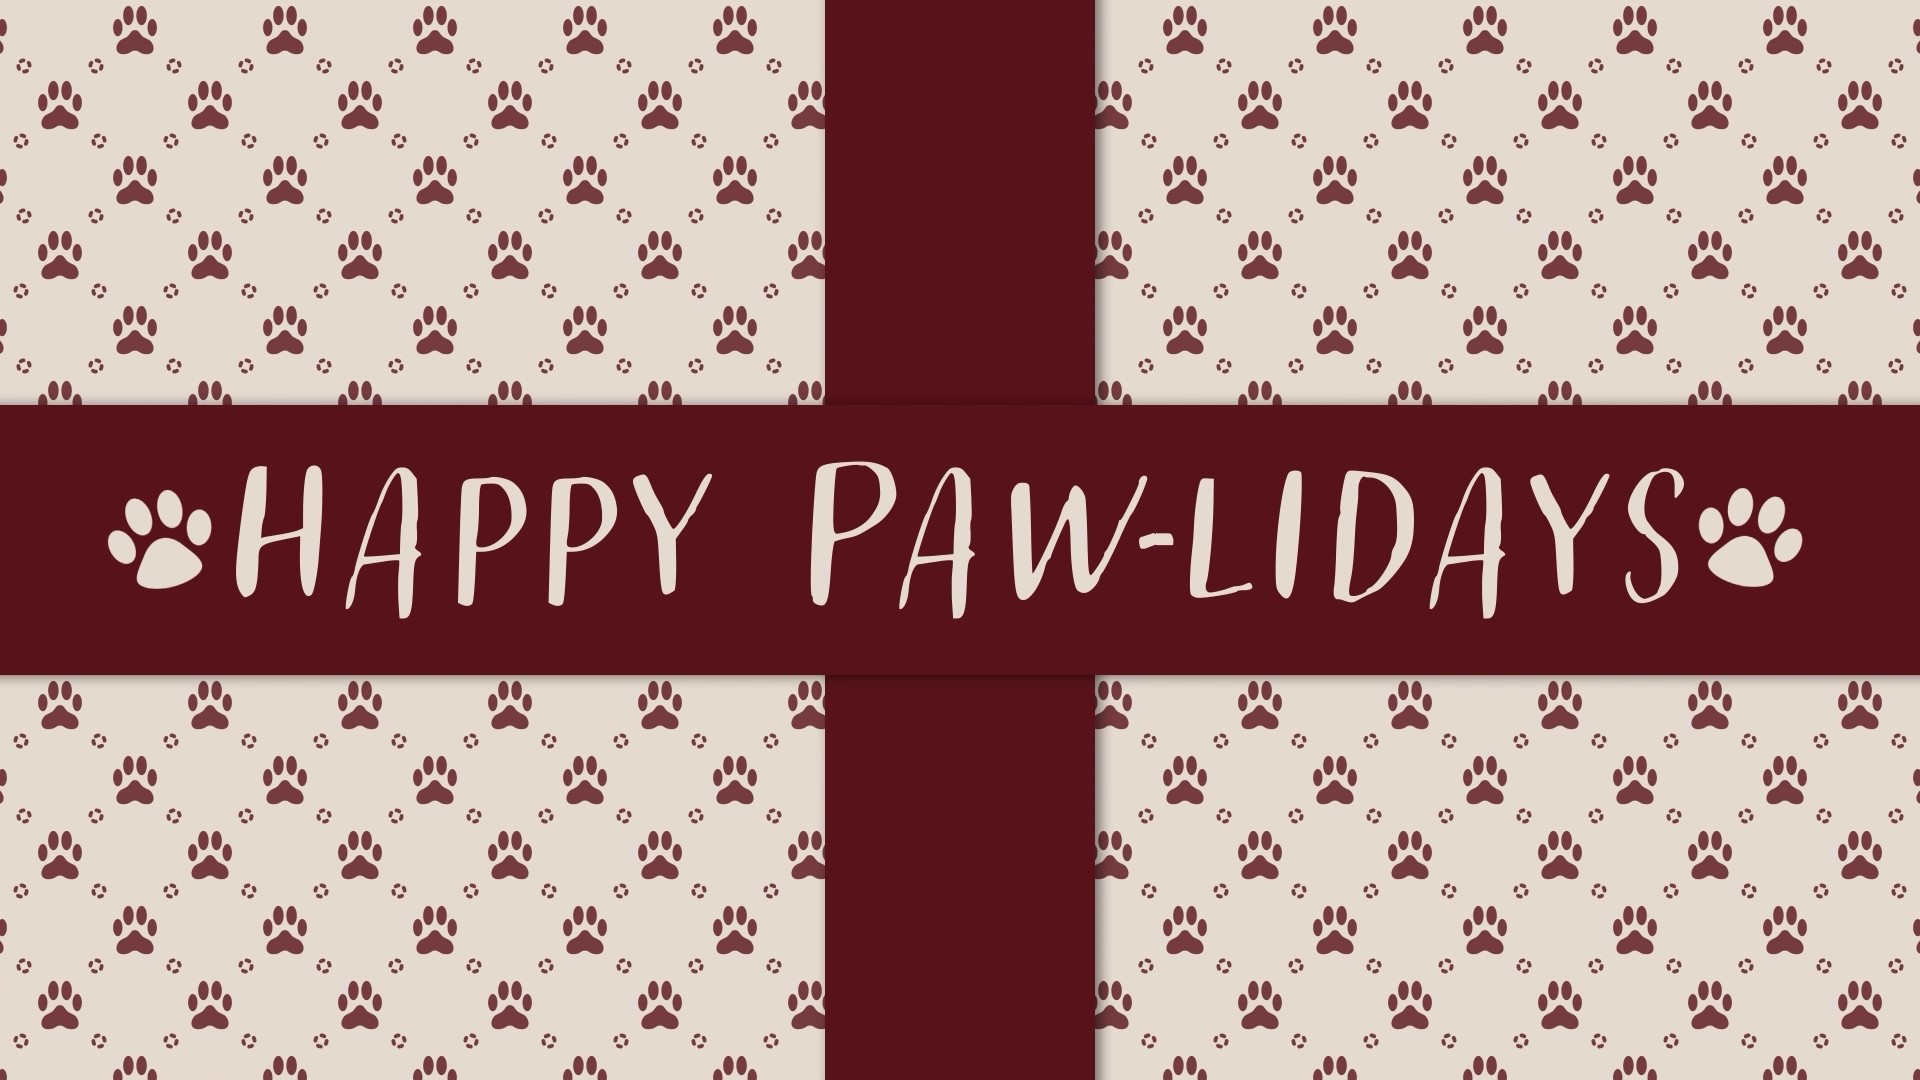 They're our constant companions, so why not celebrate them for the 'howl-idays'?